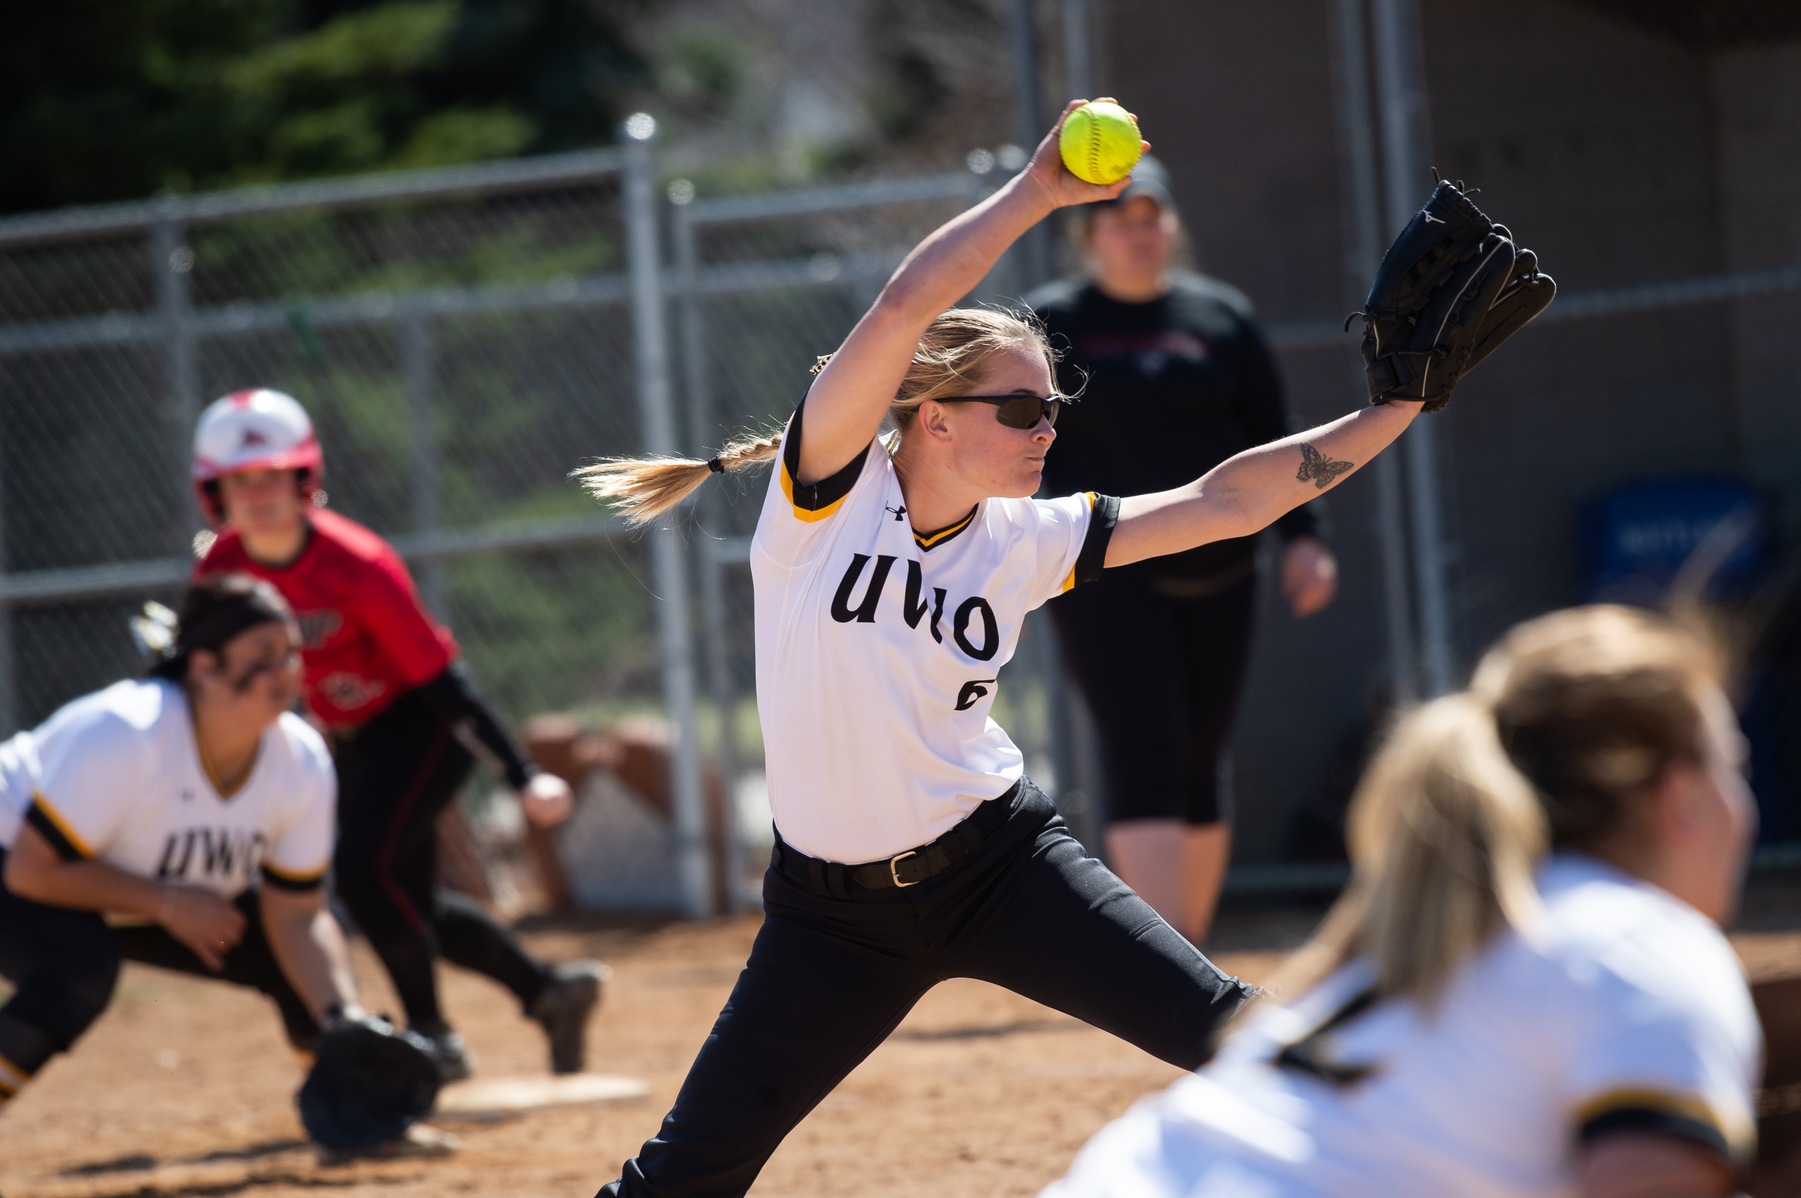 Natalie Dillon picked up a save across 2.1 innings of relief against the Pioneers.